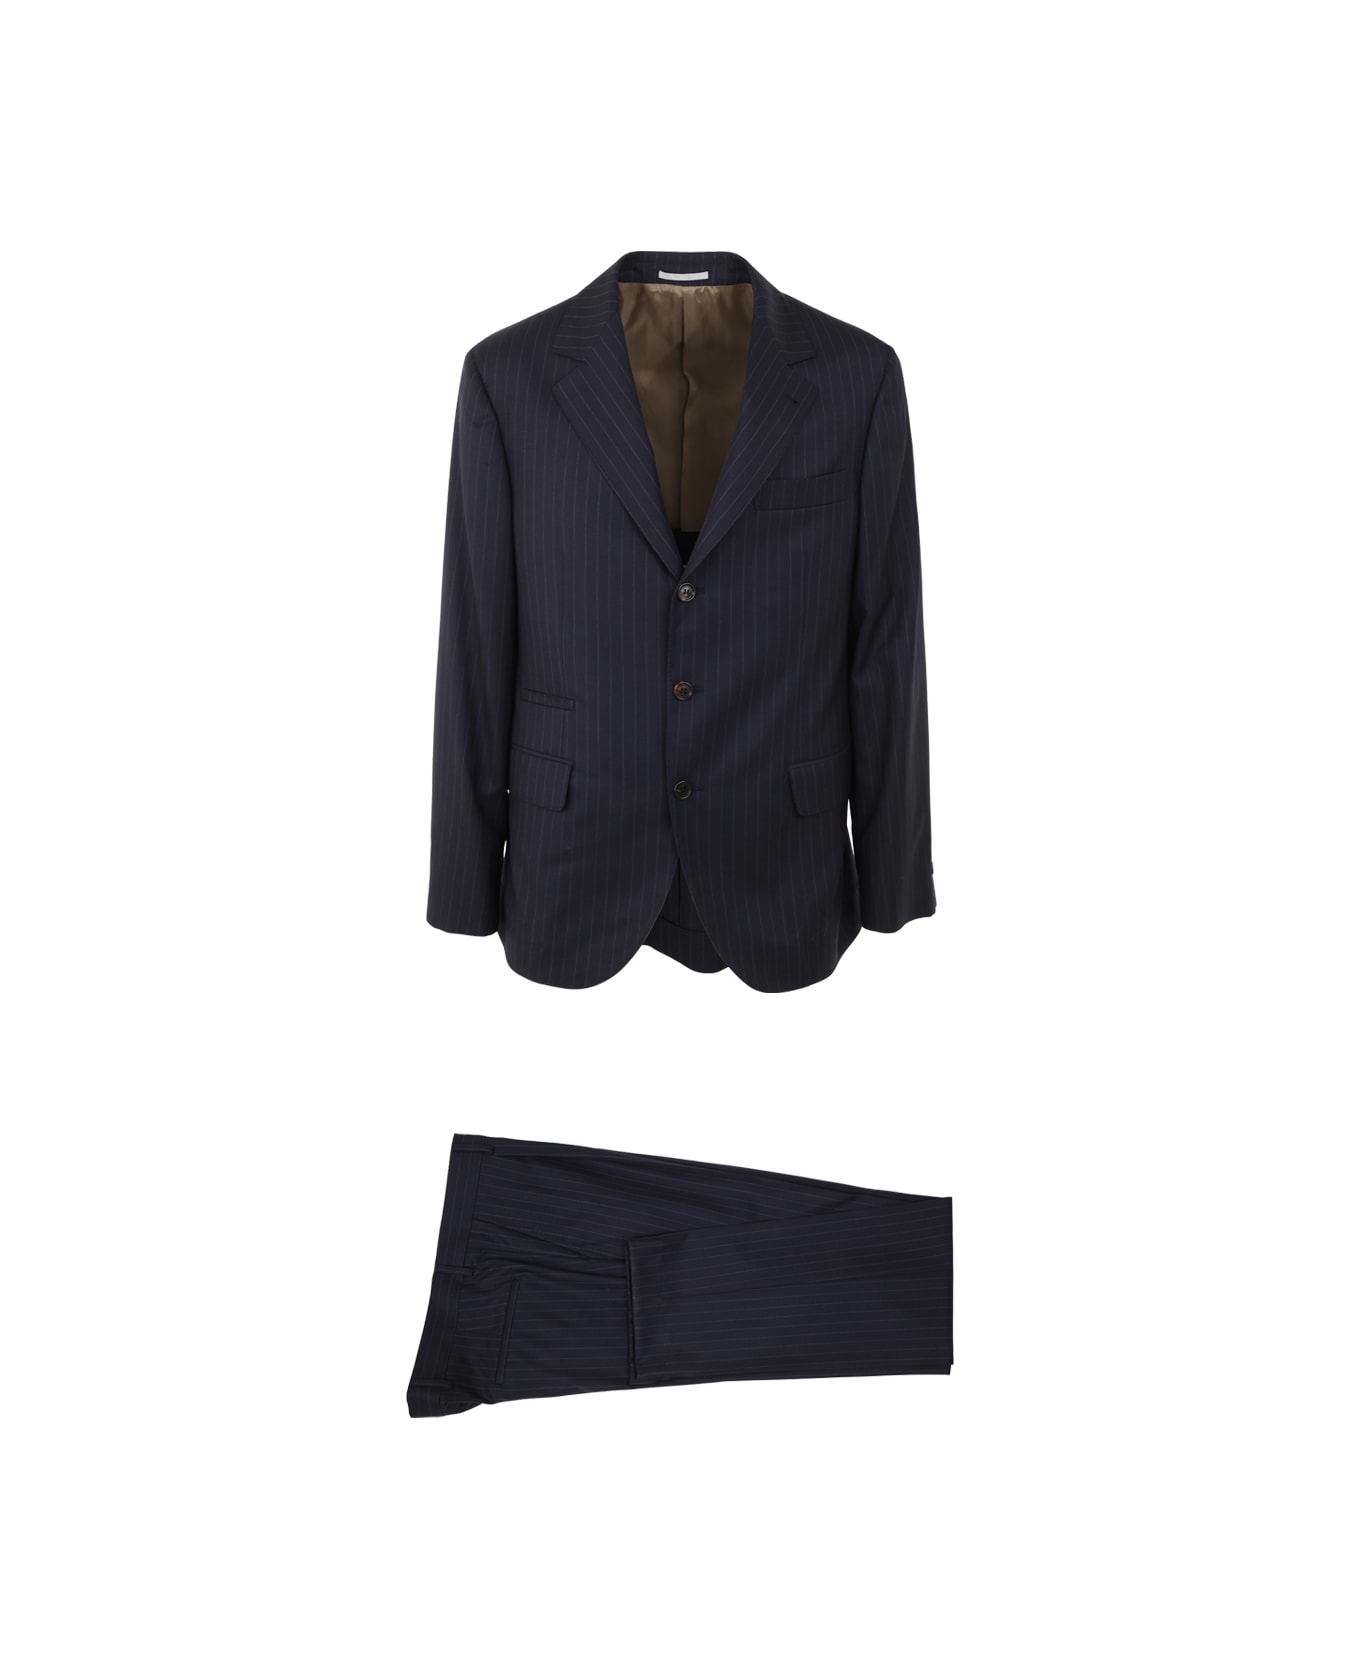 Brunello Cucinelli Single Breasted Suit - Navy